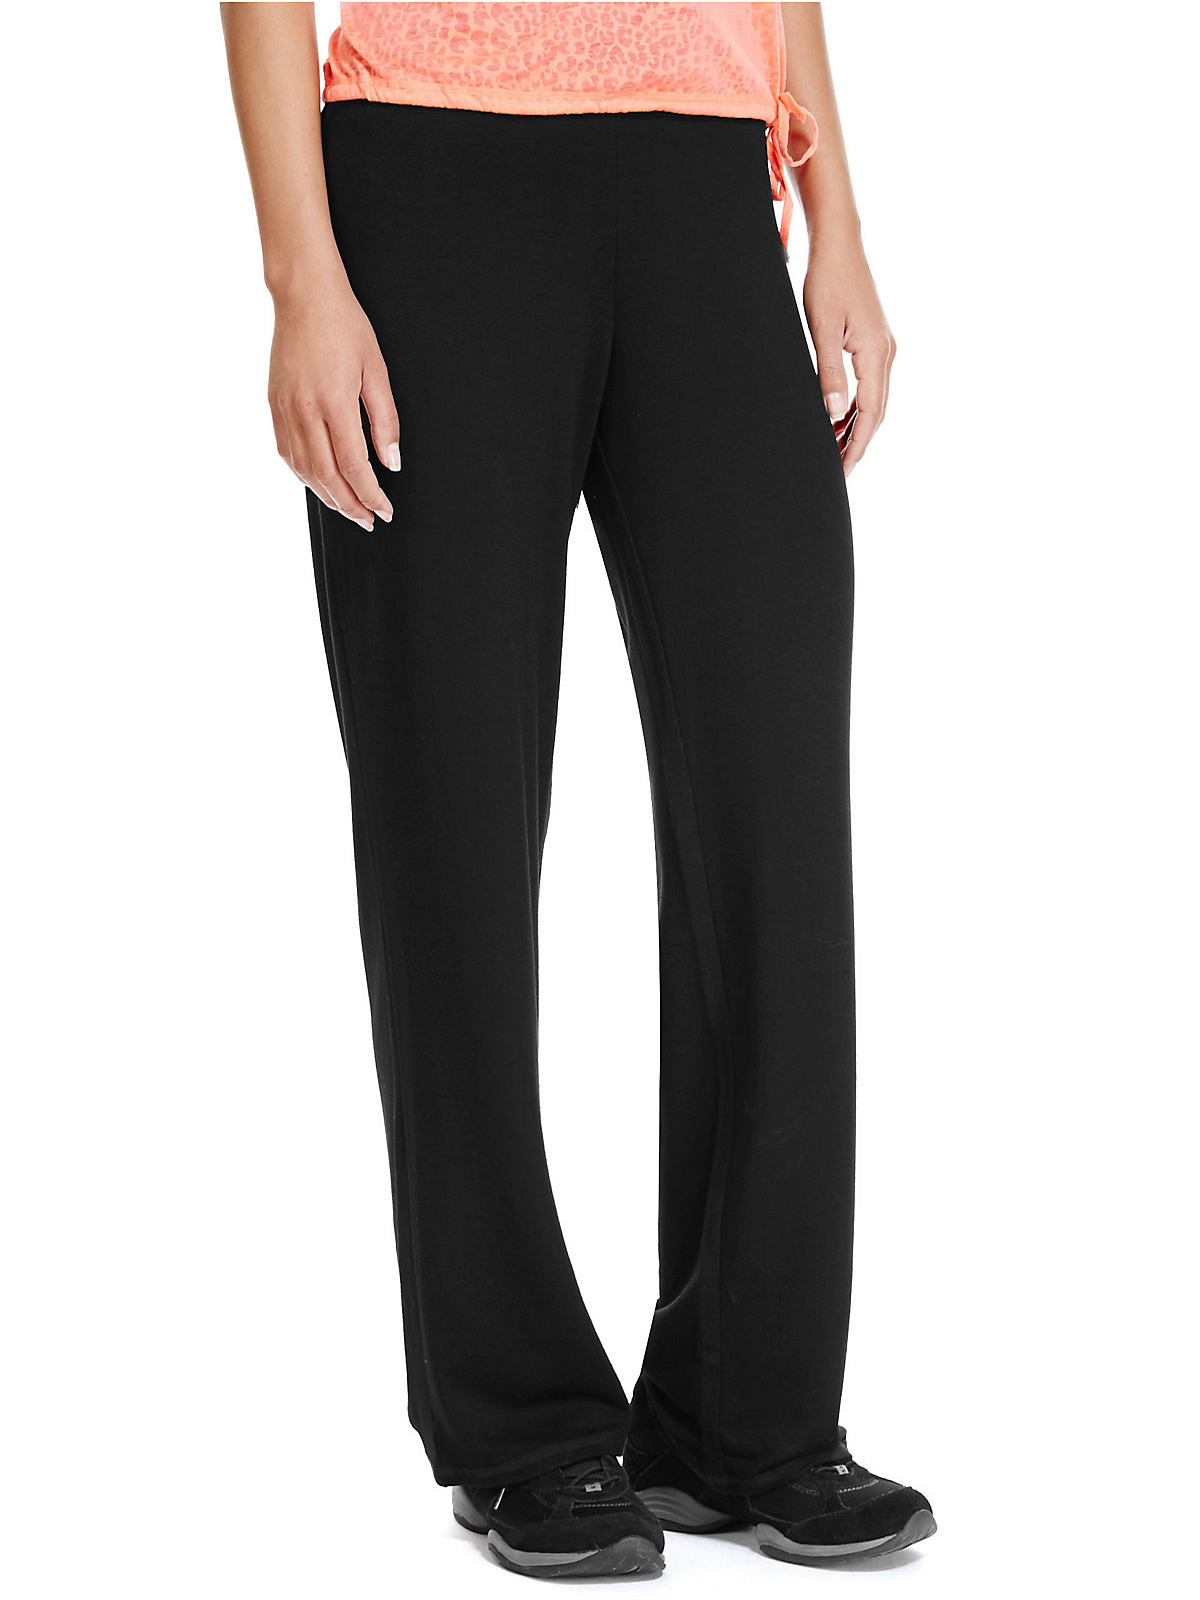 Marks and Spencer - - M&5 BLACK Modal Blend Yoga Trousers - Size 8 to 24